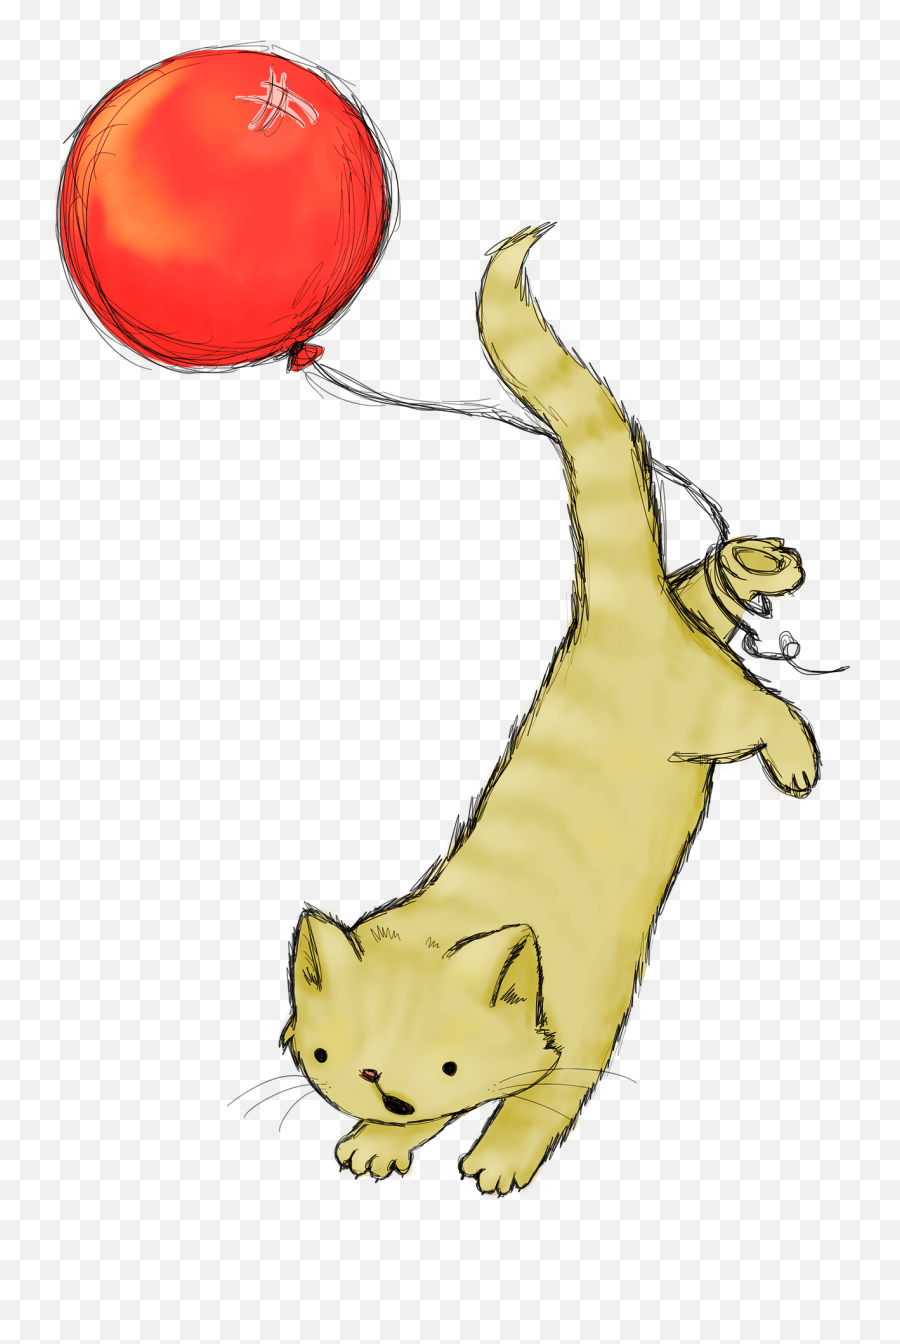 Cat With Red Balloon Clipart - Sketch A Mouse And Cat Emoji,3 Red Balloons Emoji